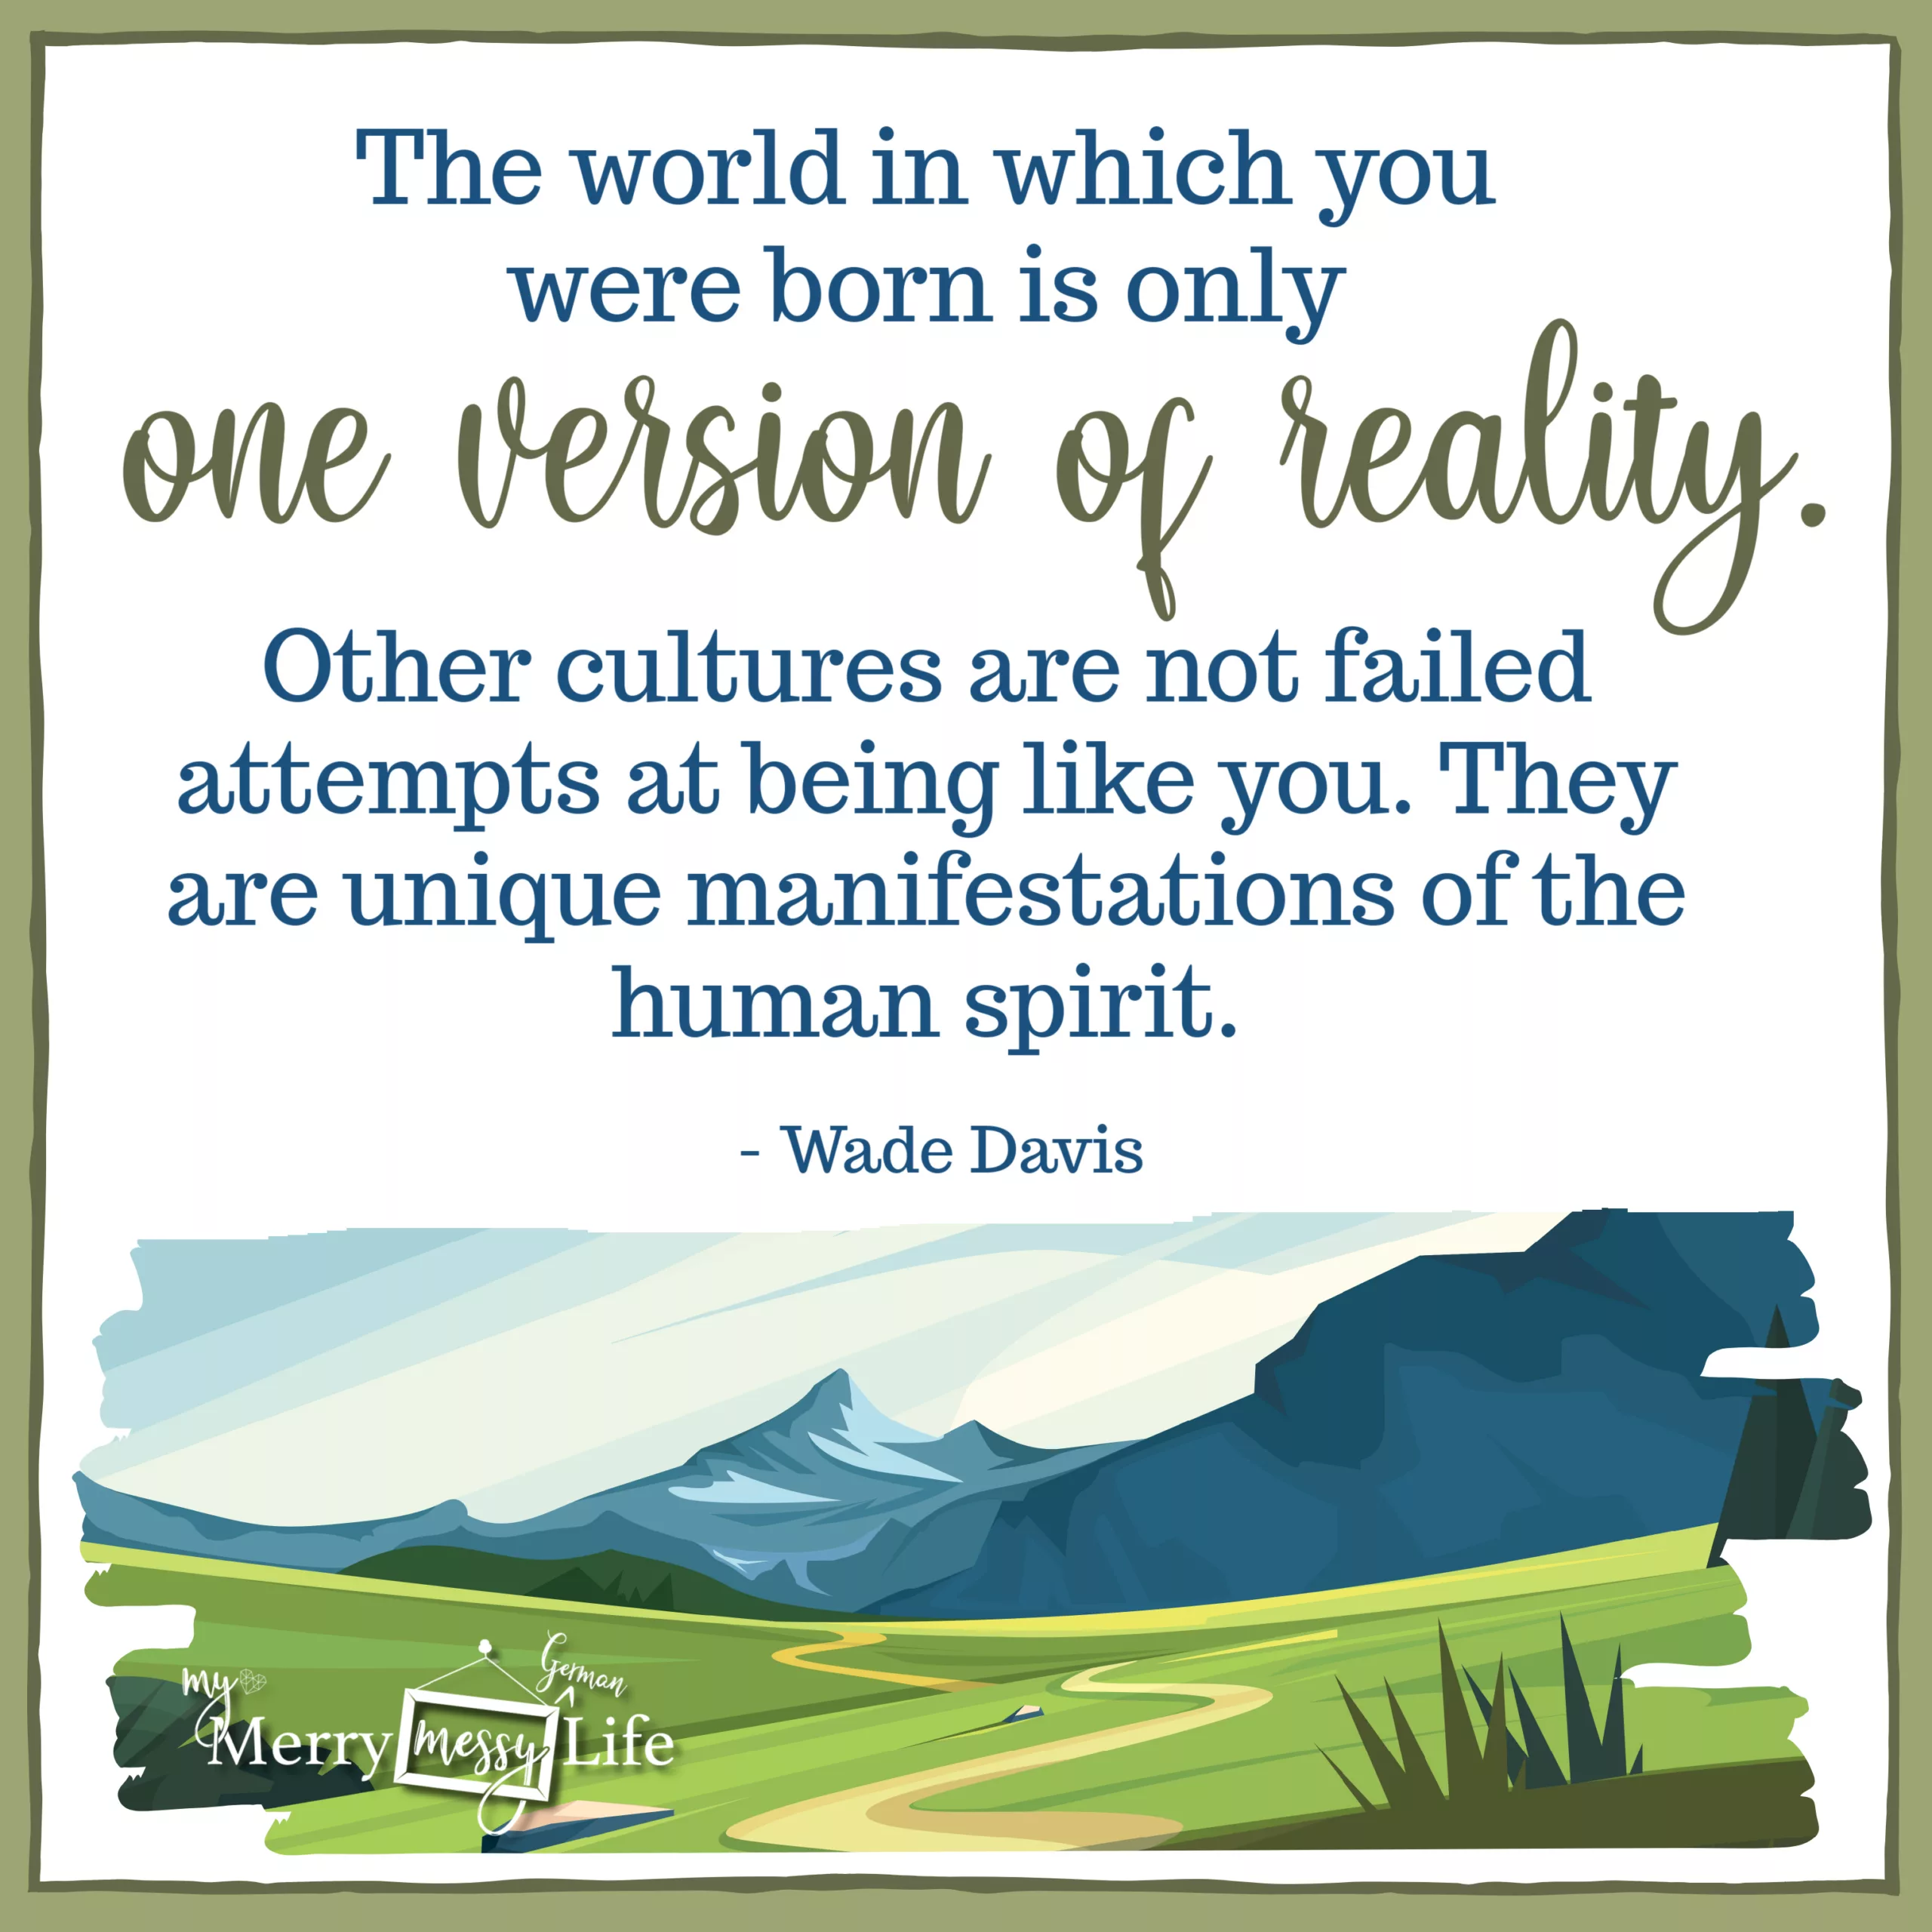 "The world in which you were born is only one version of reality. Other cultures are not failed attempts at being like you. They are unique manifestations of the human spirit." - Wade Davis. Quotes about living abroad